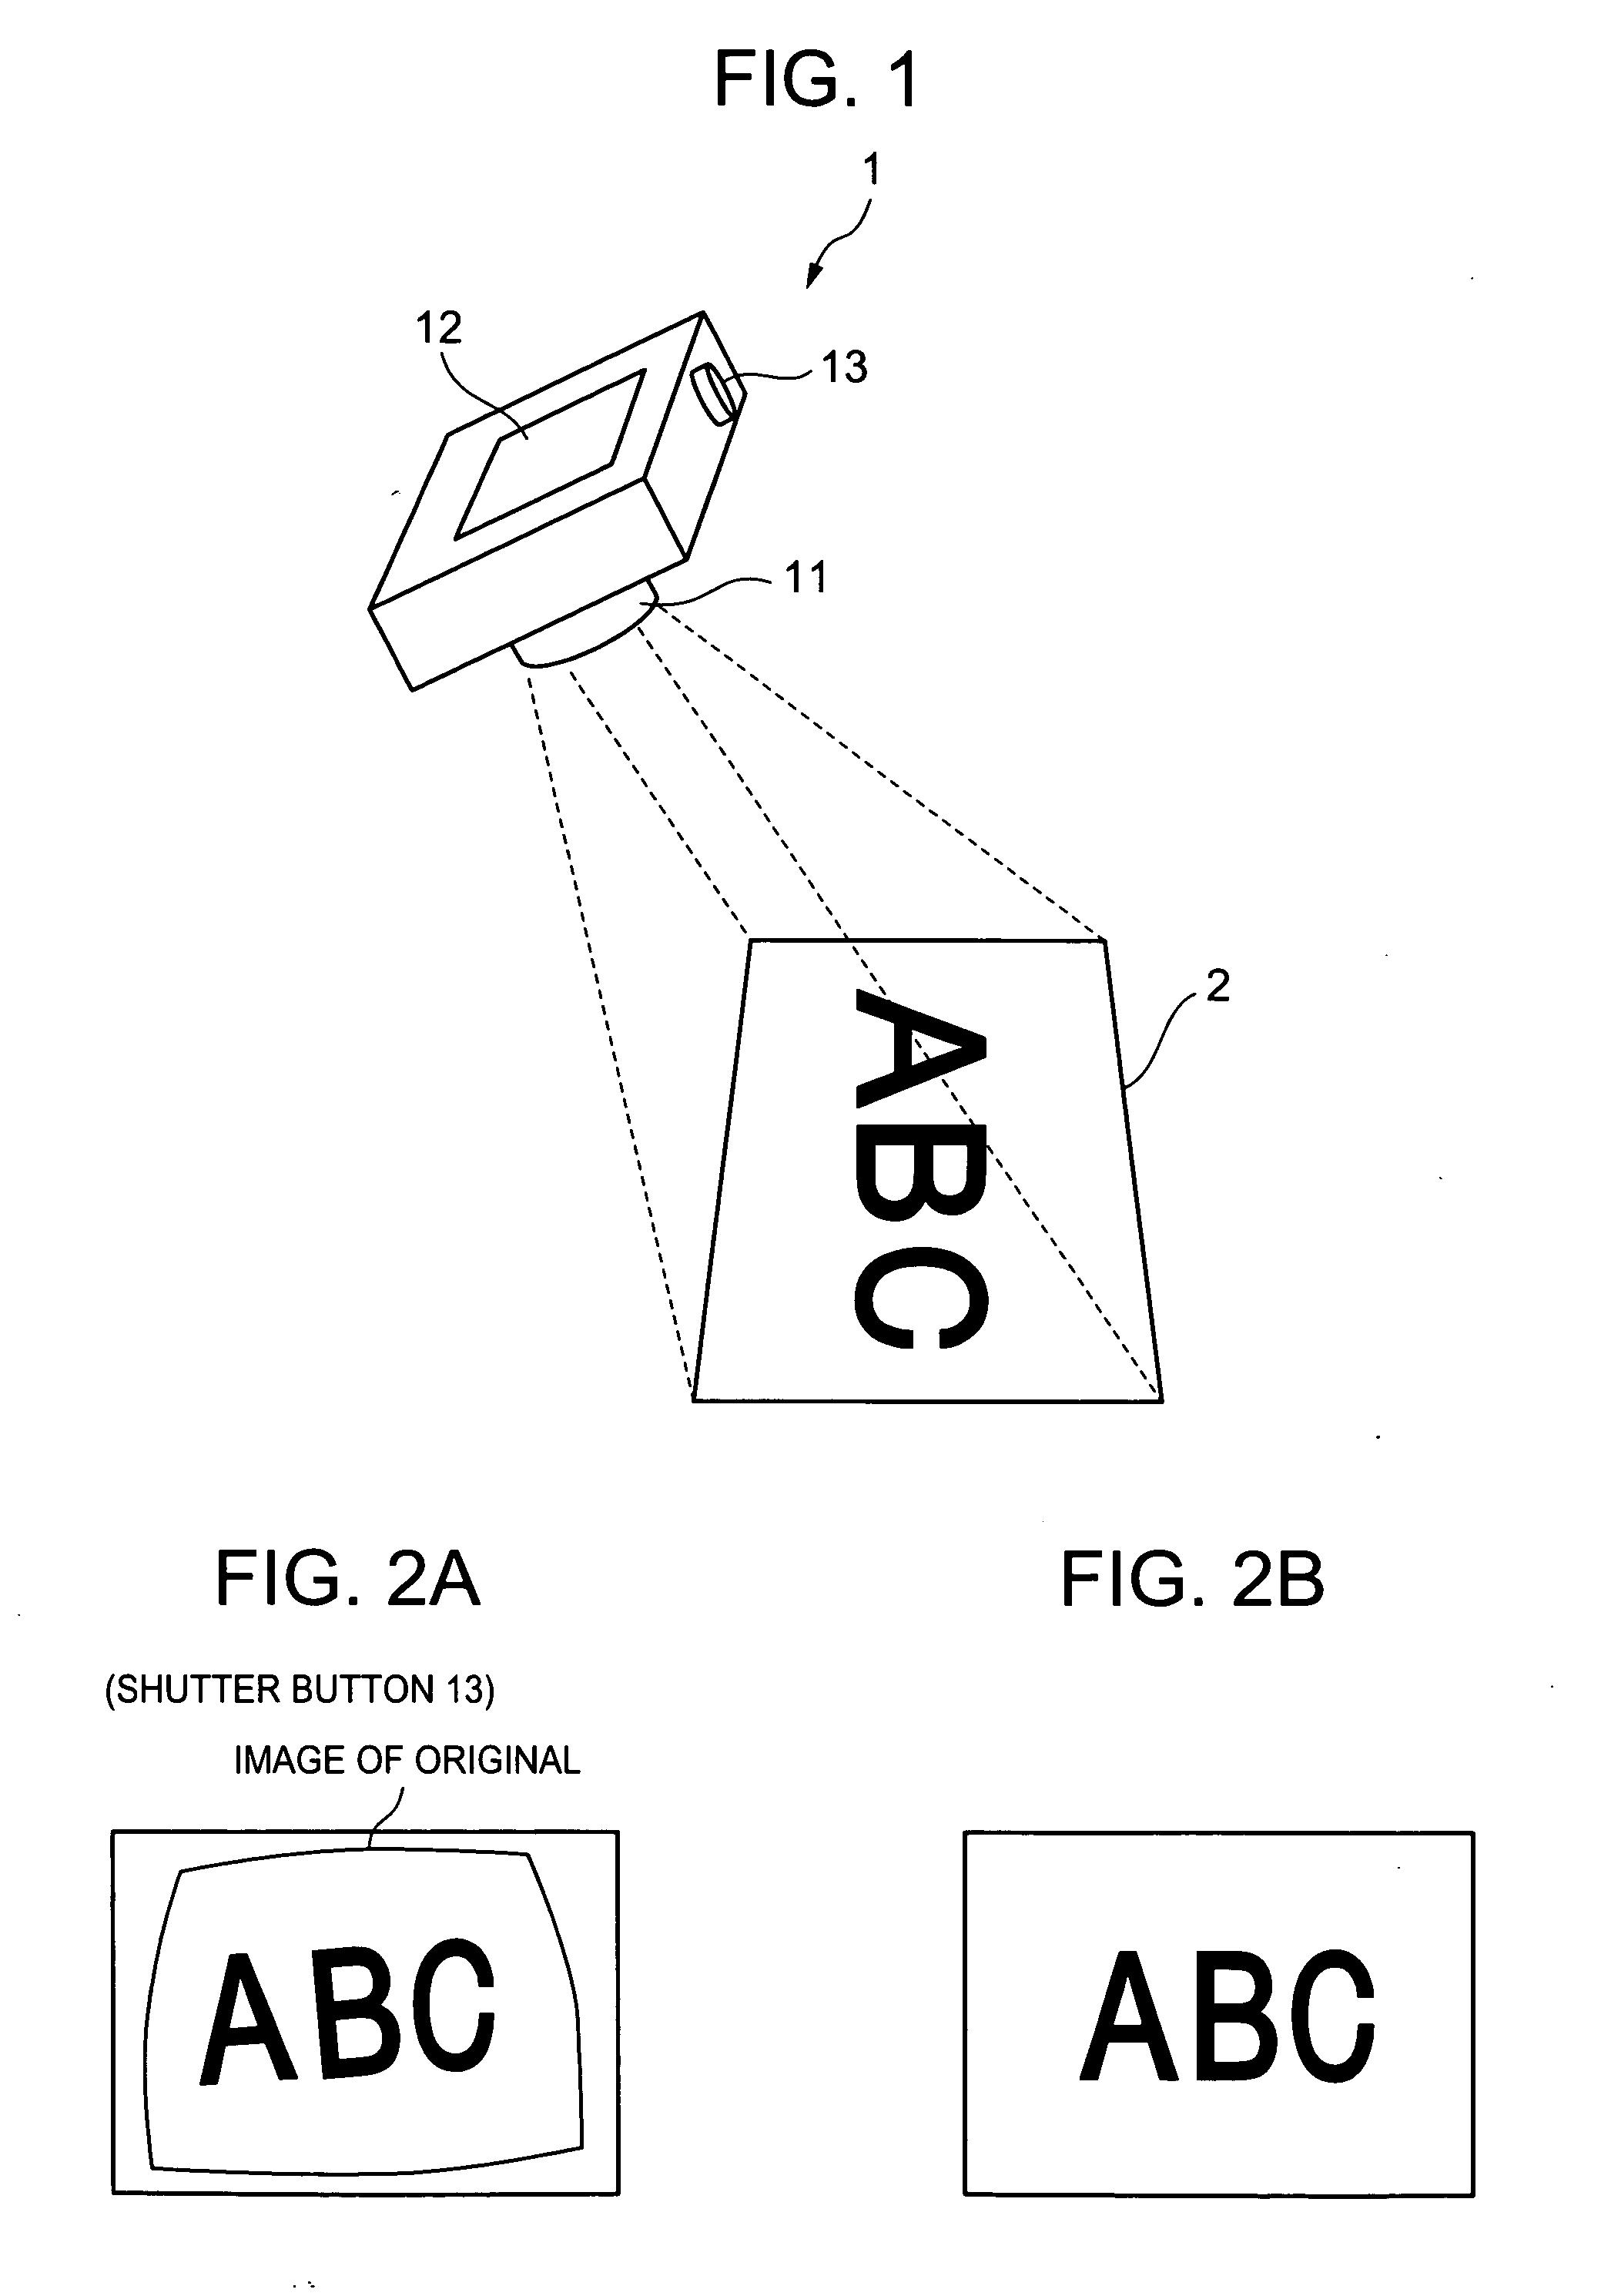 Image processing apparatus for correcting distortion of image and image shooting apparatus for correcting distortion of shot image